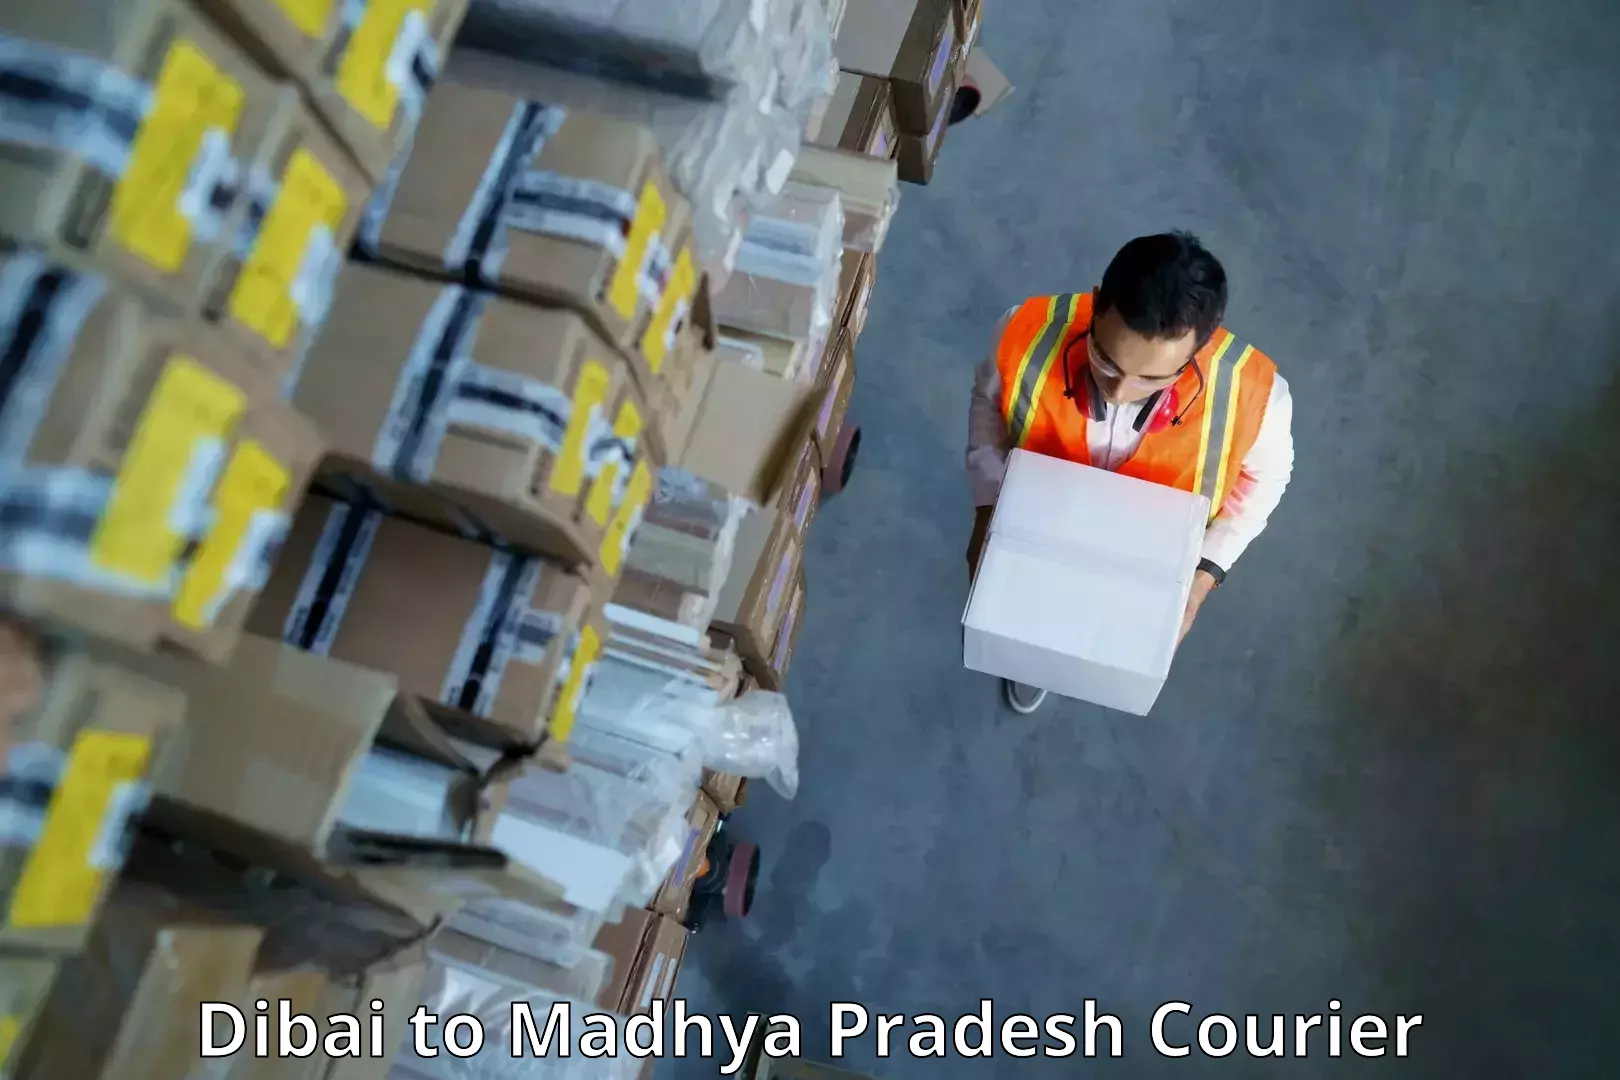 On-call courier service Dibai to Bhopal